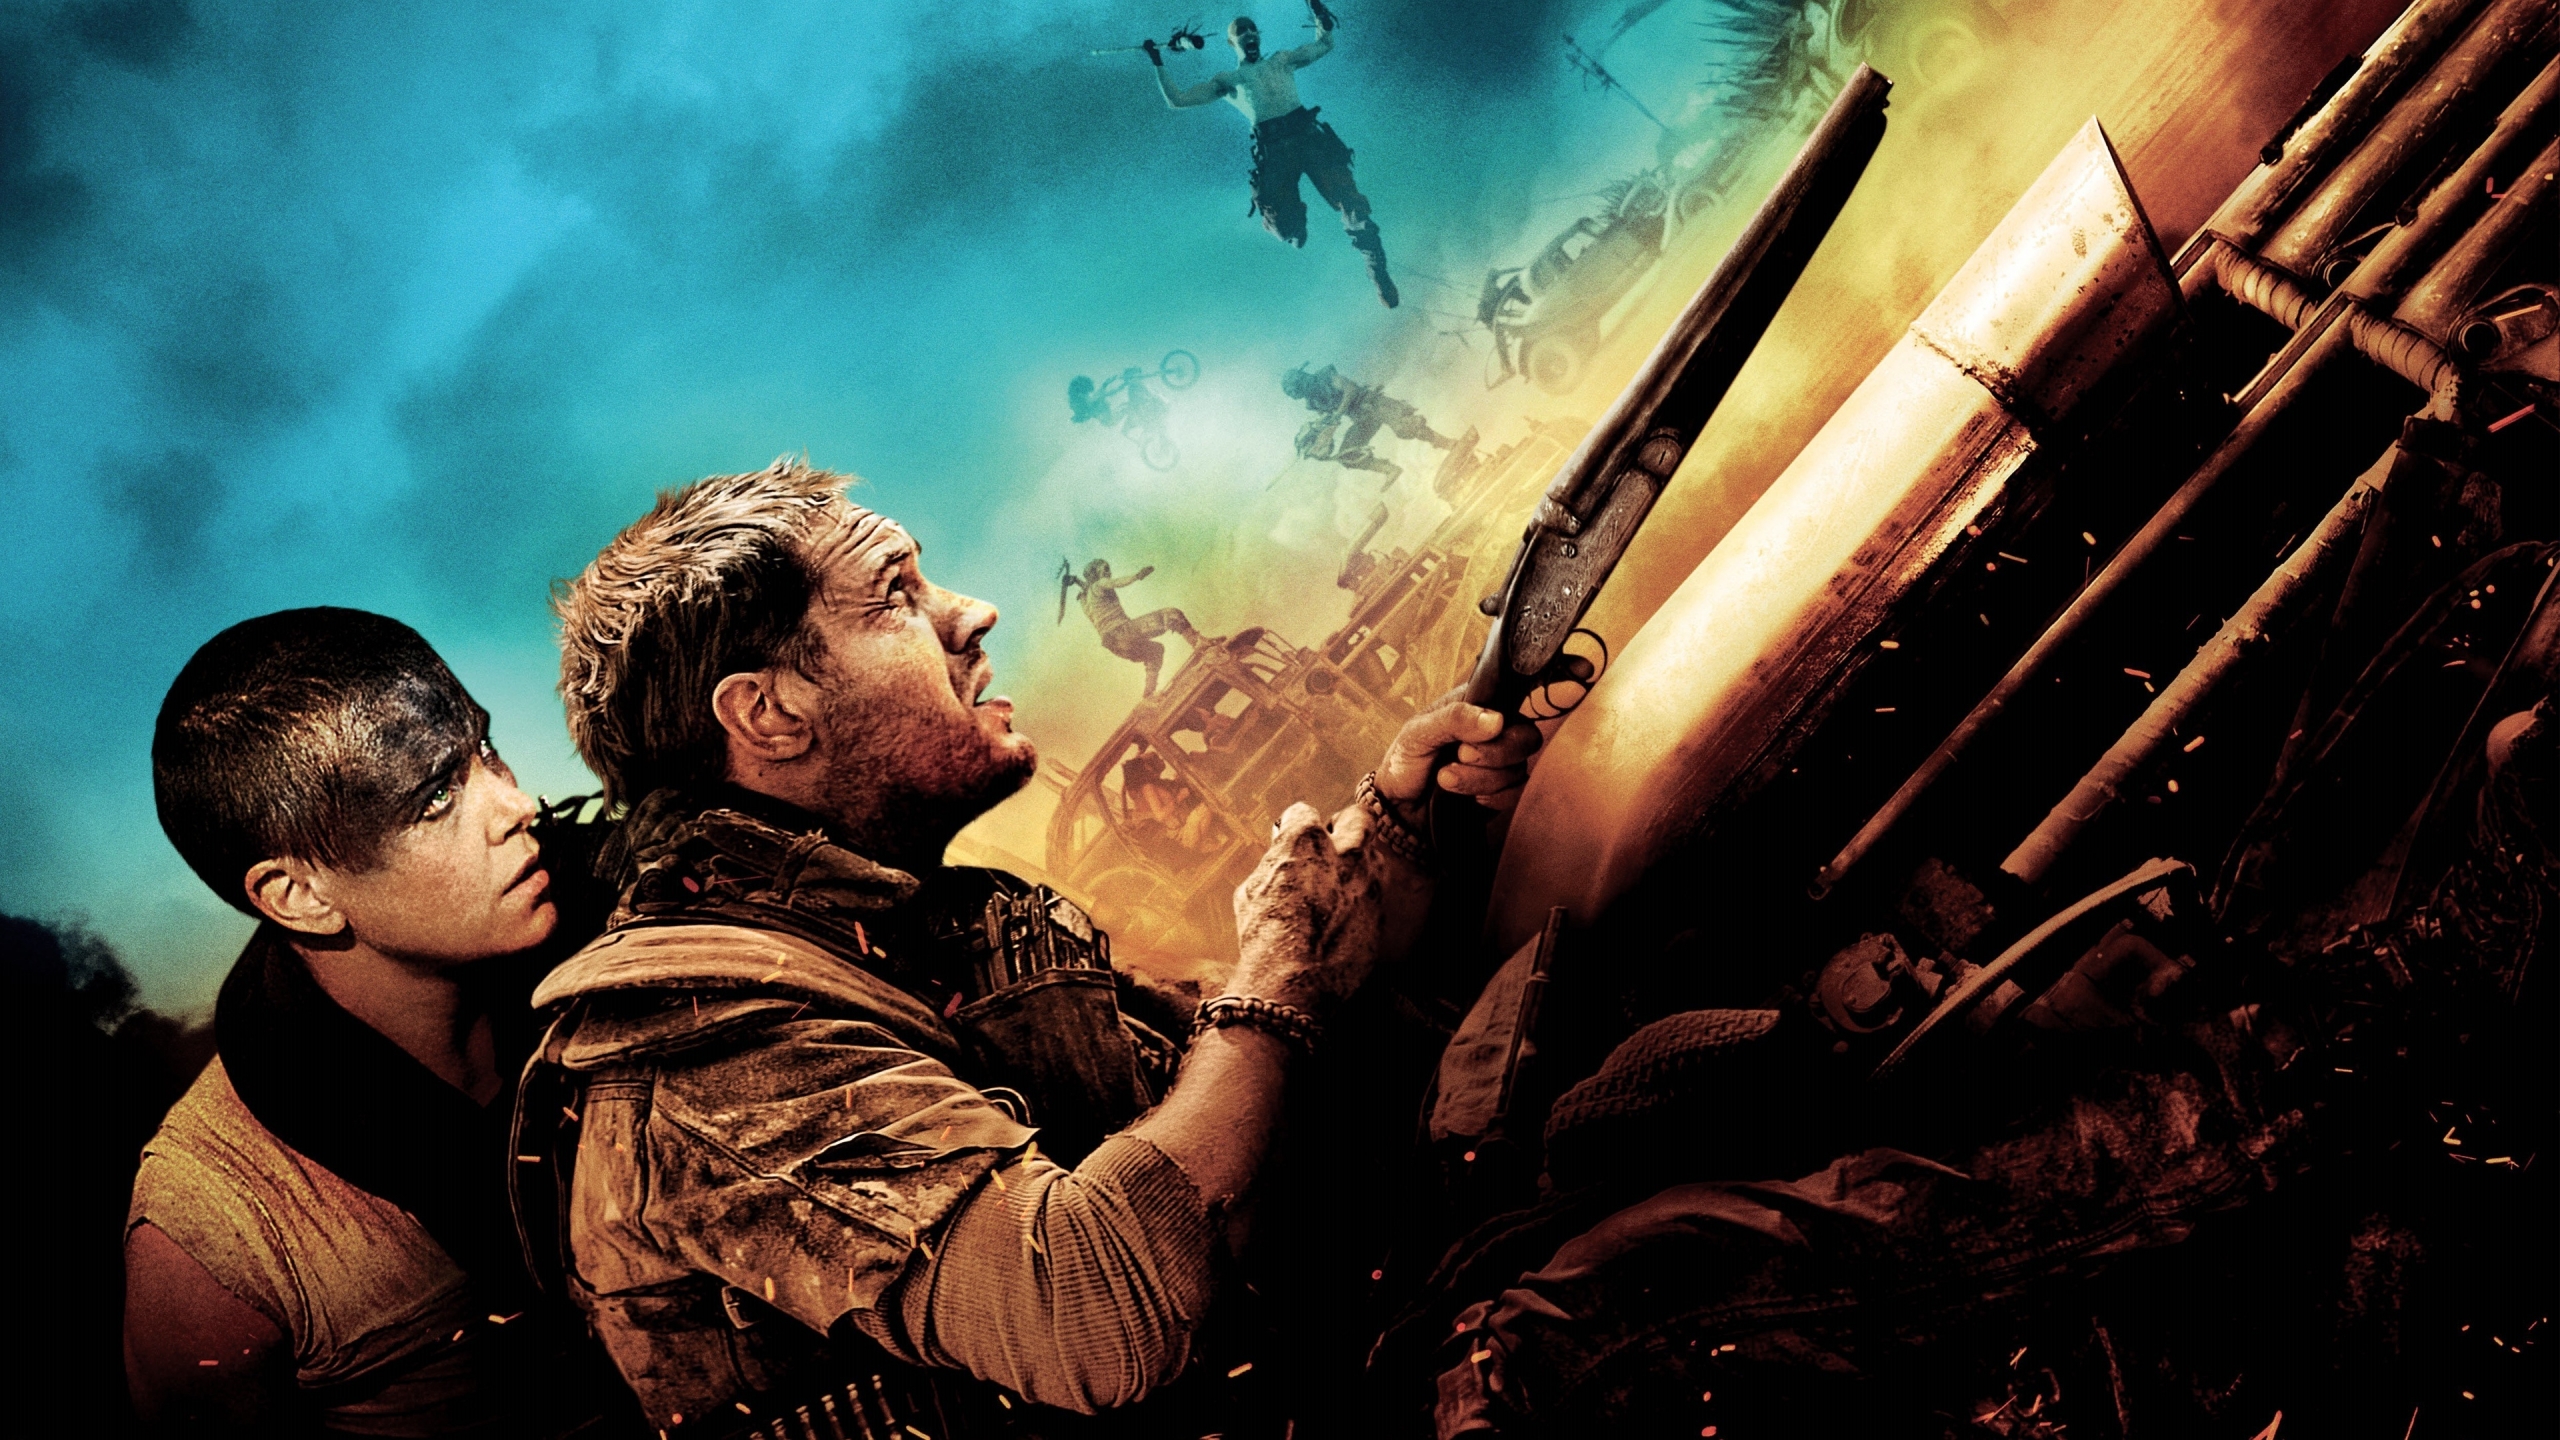 Mad Max 2015 for 2560x1440 HDTV resolution